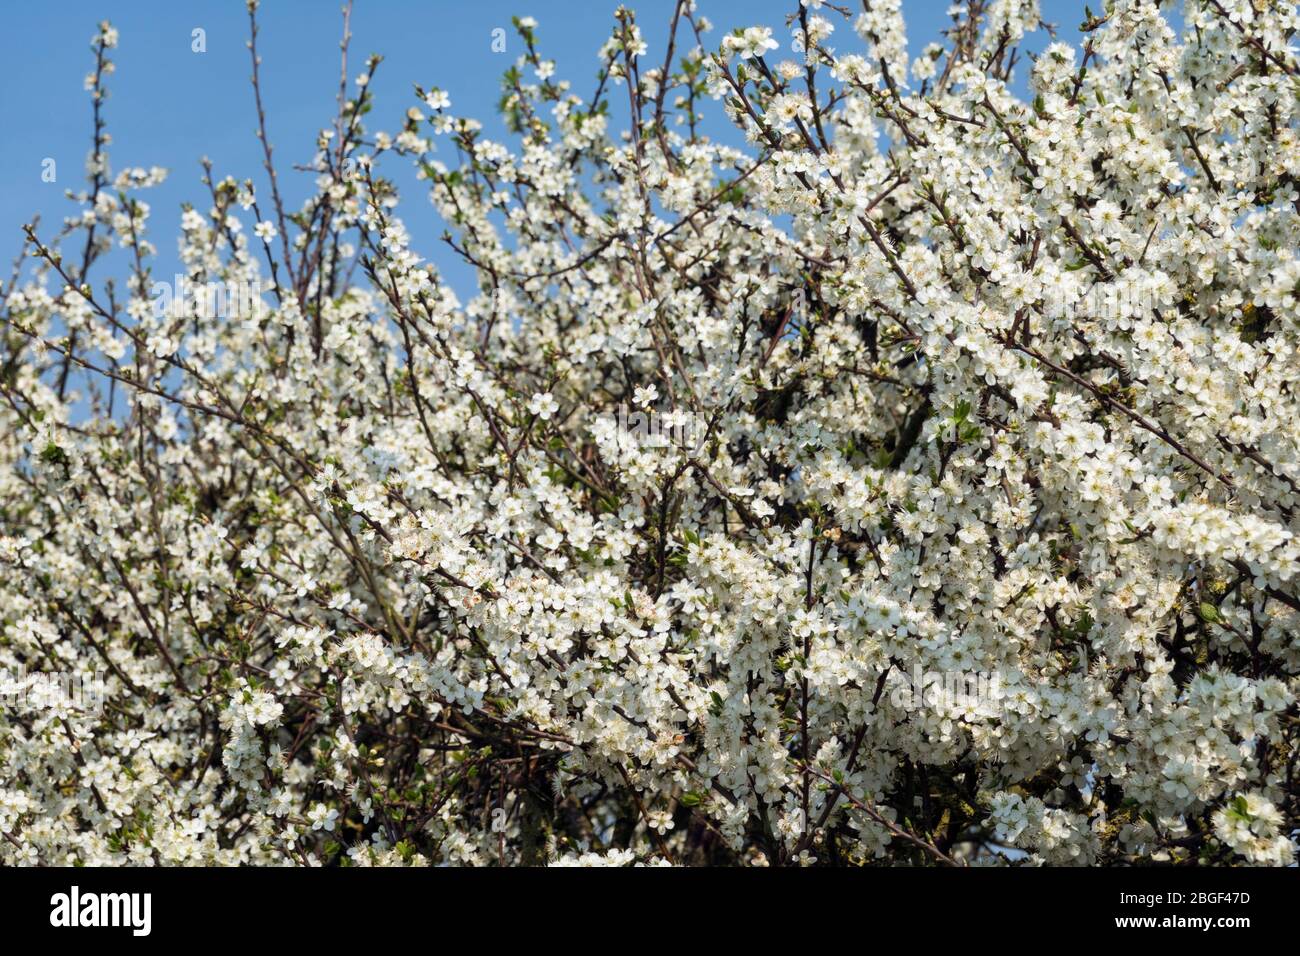 Blackthorn blossom in early April, East Garston, West Berkshire, England, United Kingdom, Europe Stock Photo